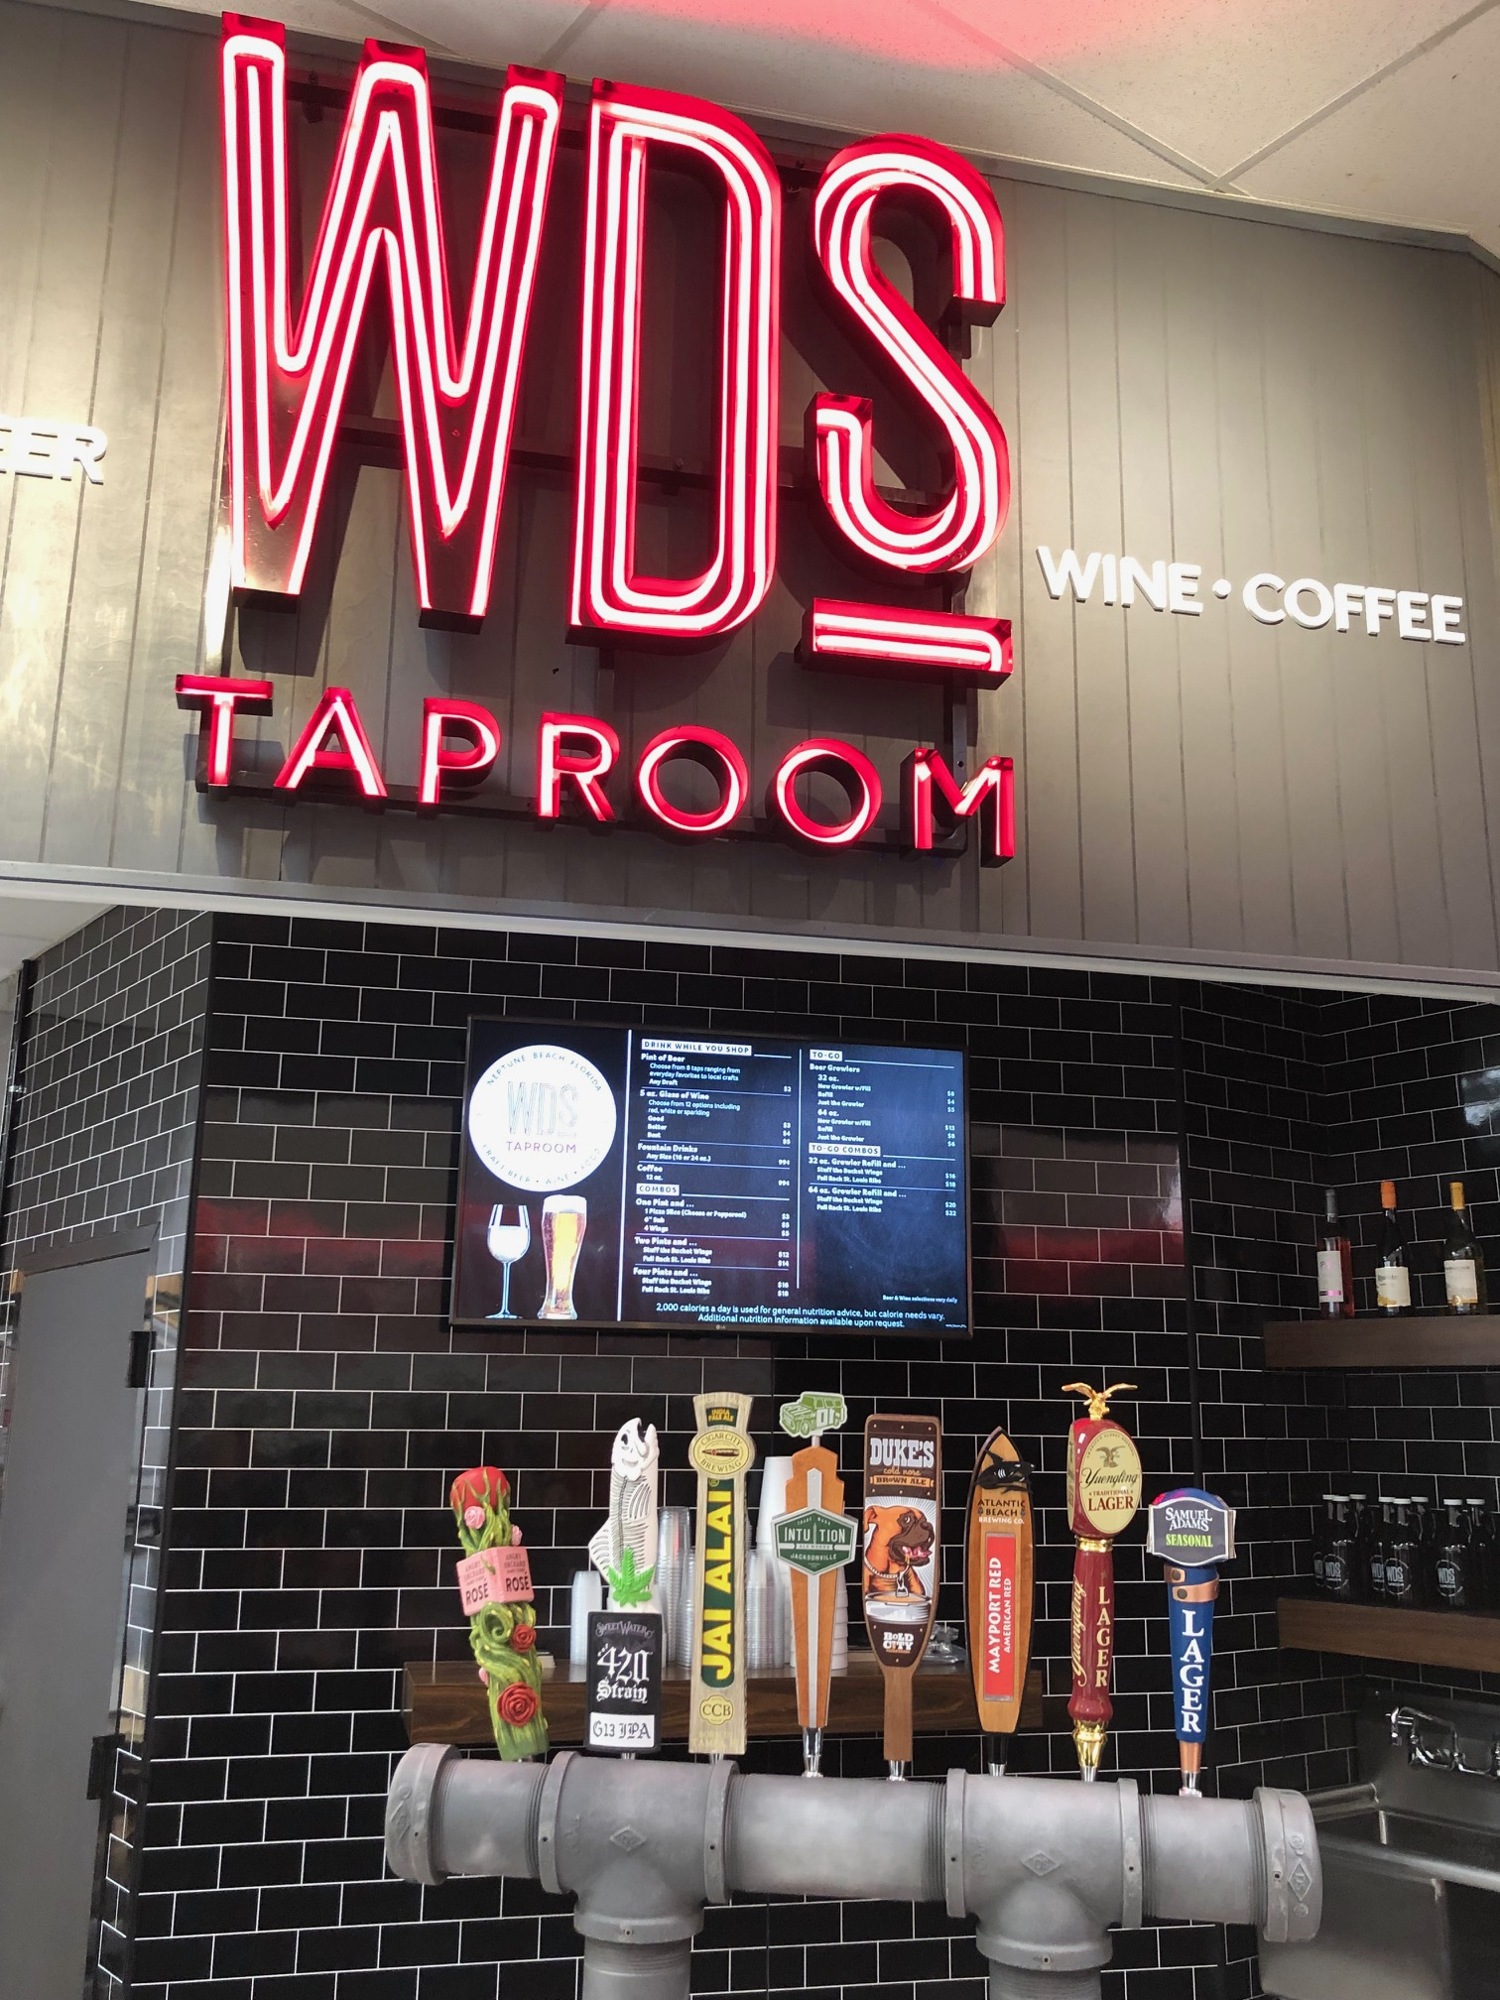 WD's Taproom offers local craft brews for $2 a pint and wine for $3 for a 5-ounce glass.